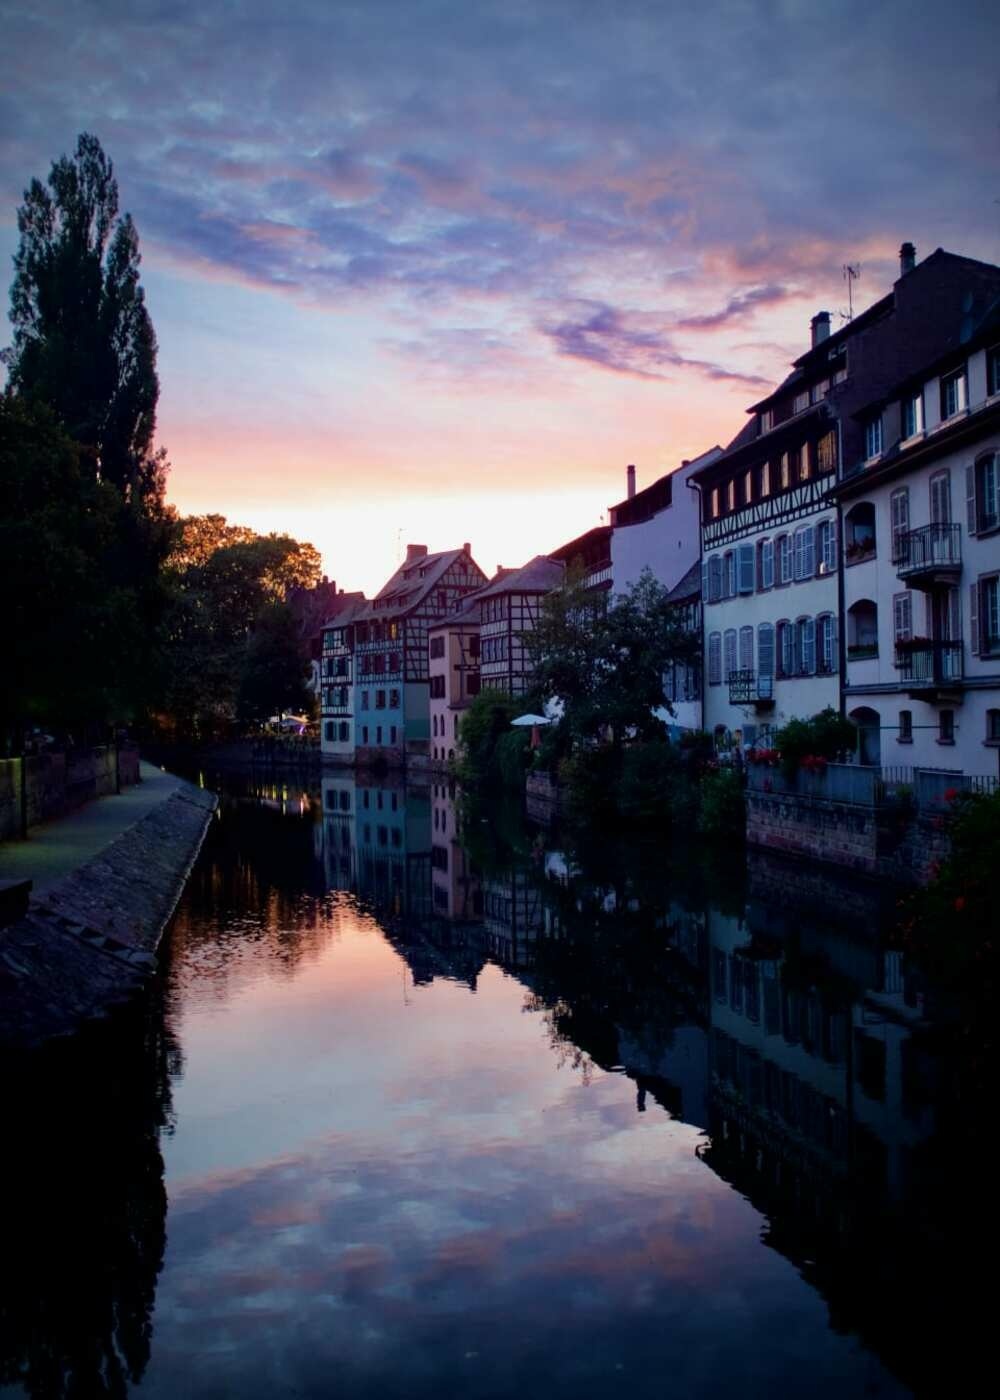 Sun setting over the river aside the La Petite France district of Strasbourg.